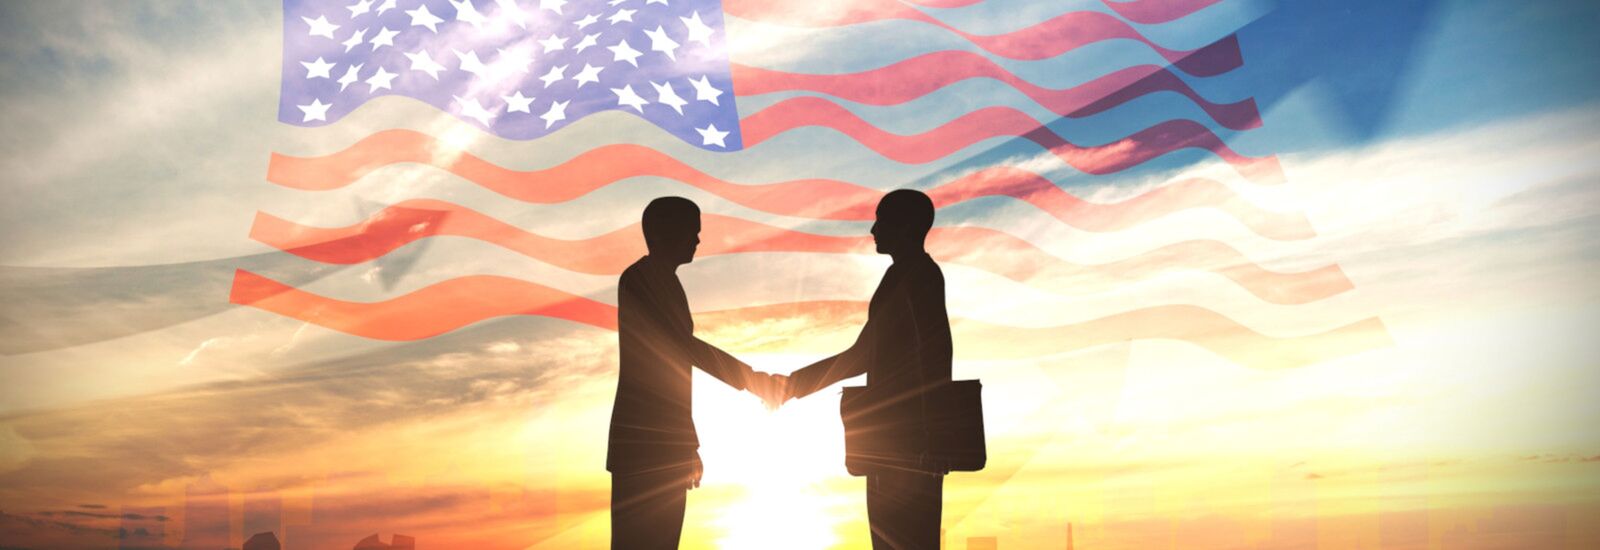 Two people shaking hands with sunset and American flag in background.